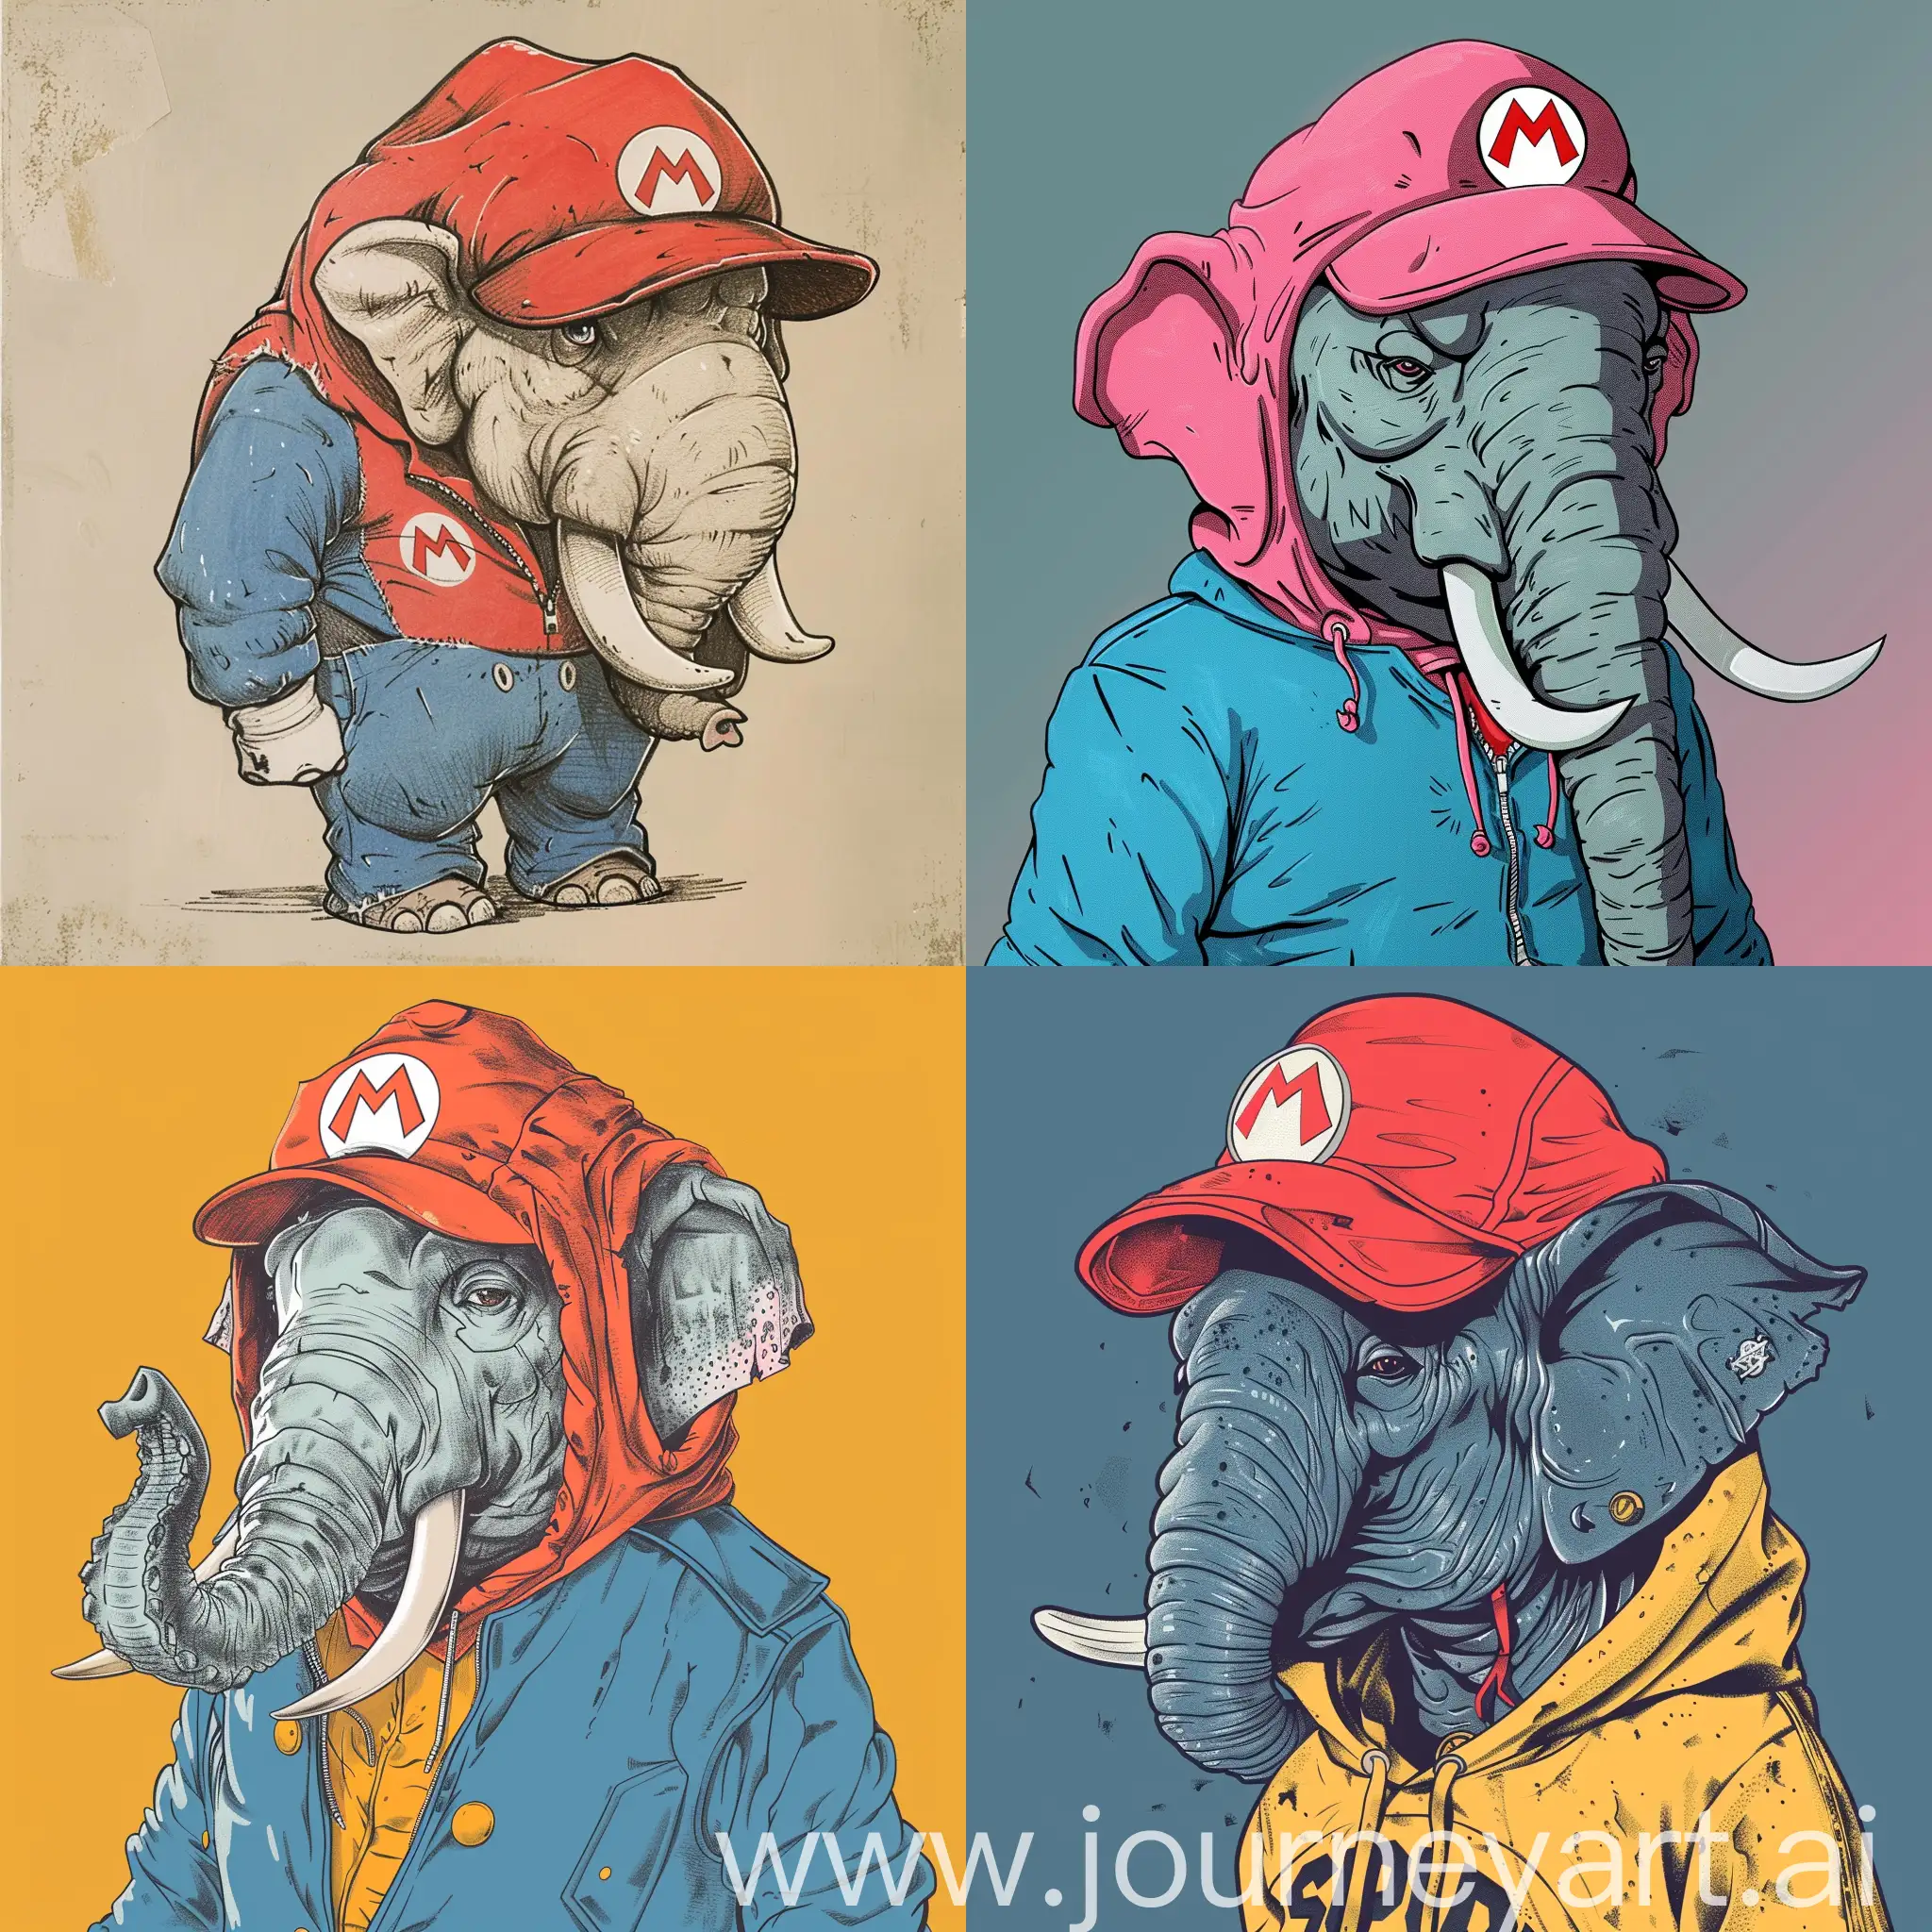 An elephant wearing a super mario outfit, 2d drawing, cell animation, cartoon network 90s-2000s drawing style